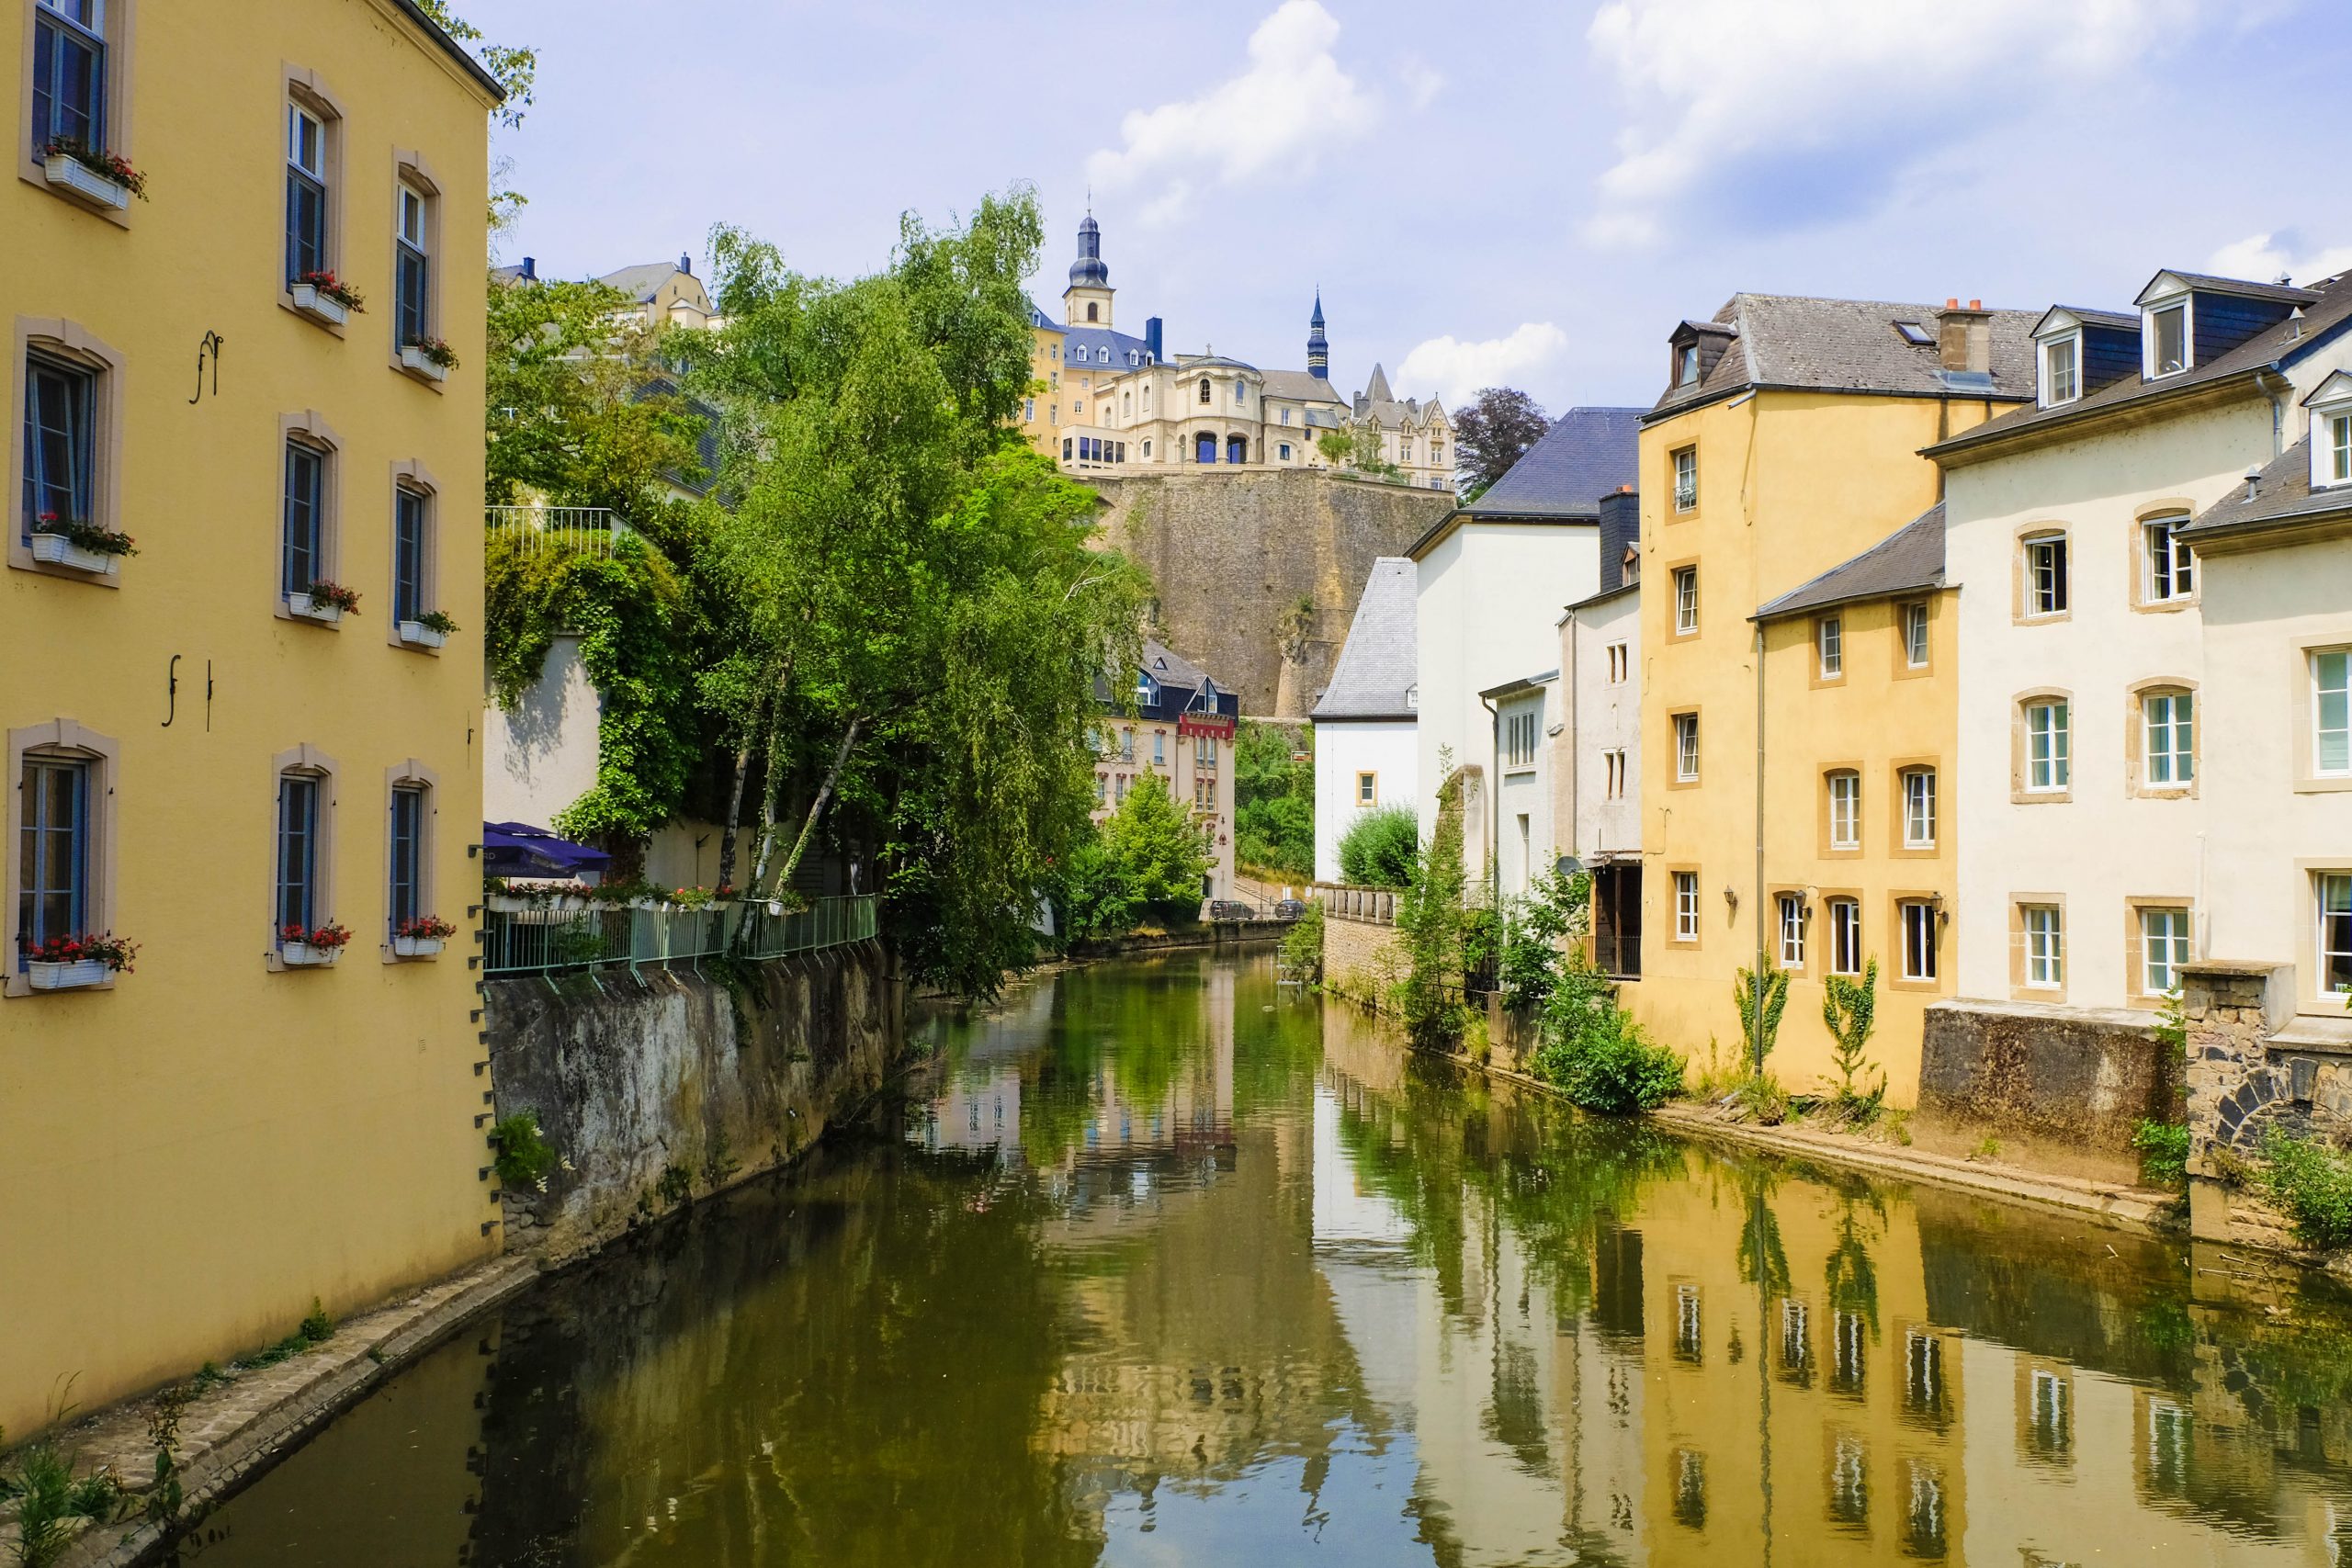 What to do in Luxembourg City